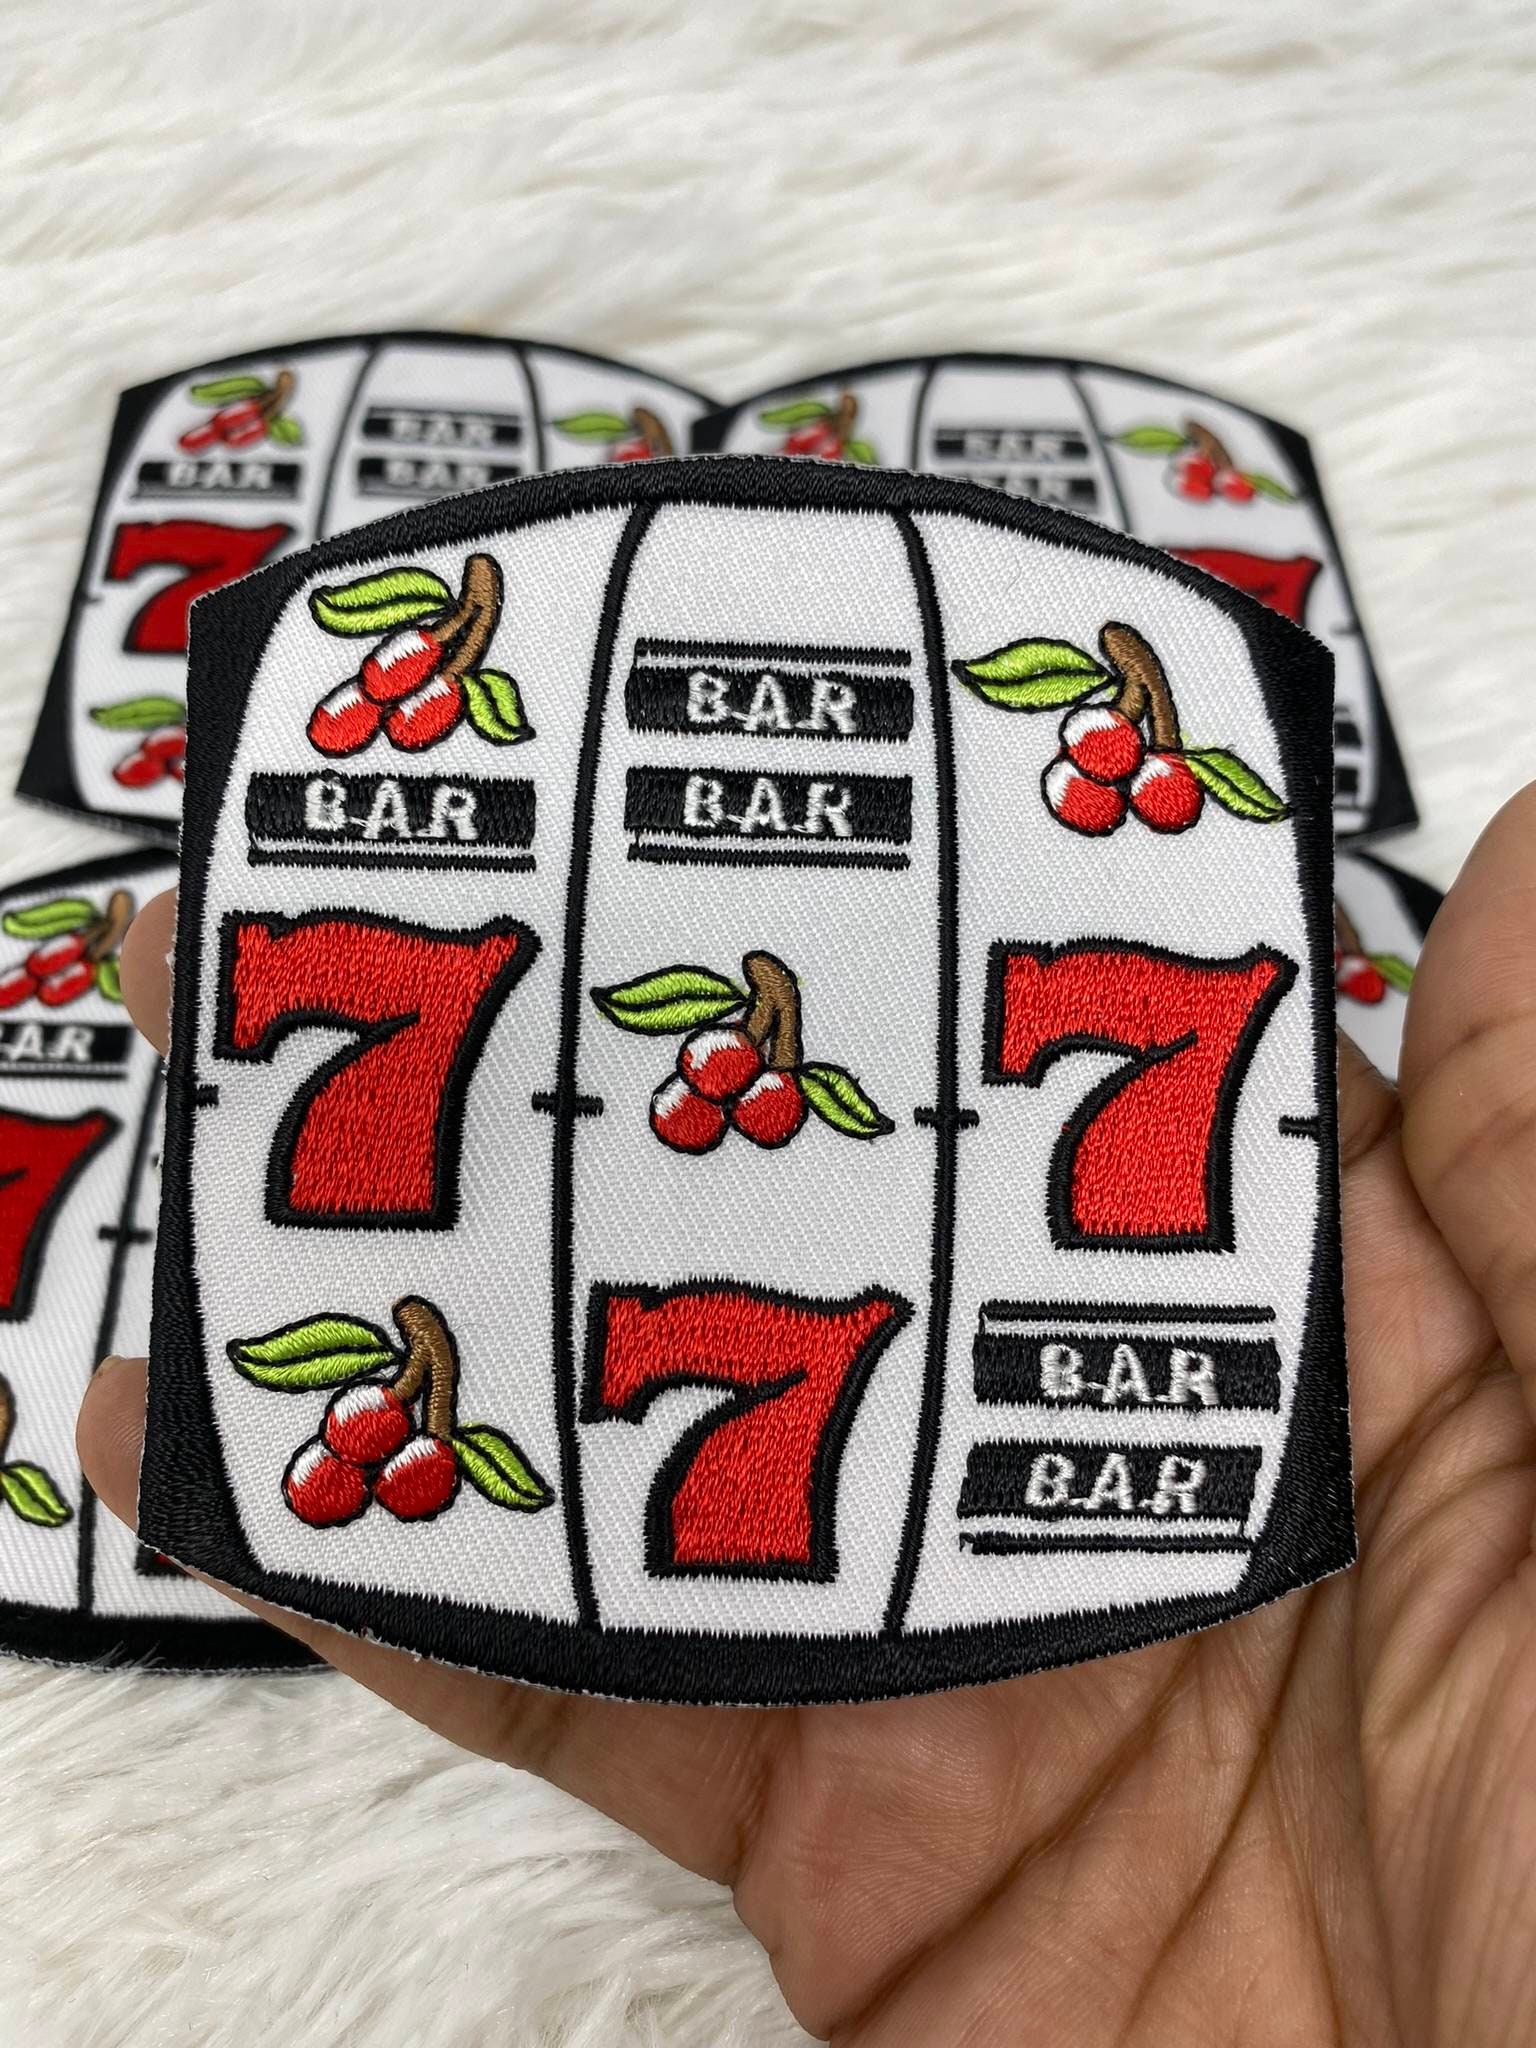  Graphic Dust Black Dice Embroidered Iron On Patch Applique  Casino Gambling Card Las Vegas Lucky Poker Jean Jacket Backpack : Arts,  Crafts & Sewing